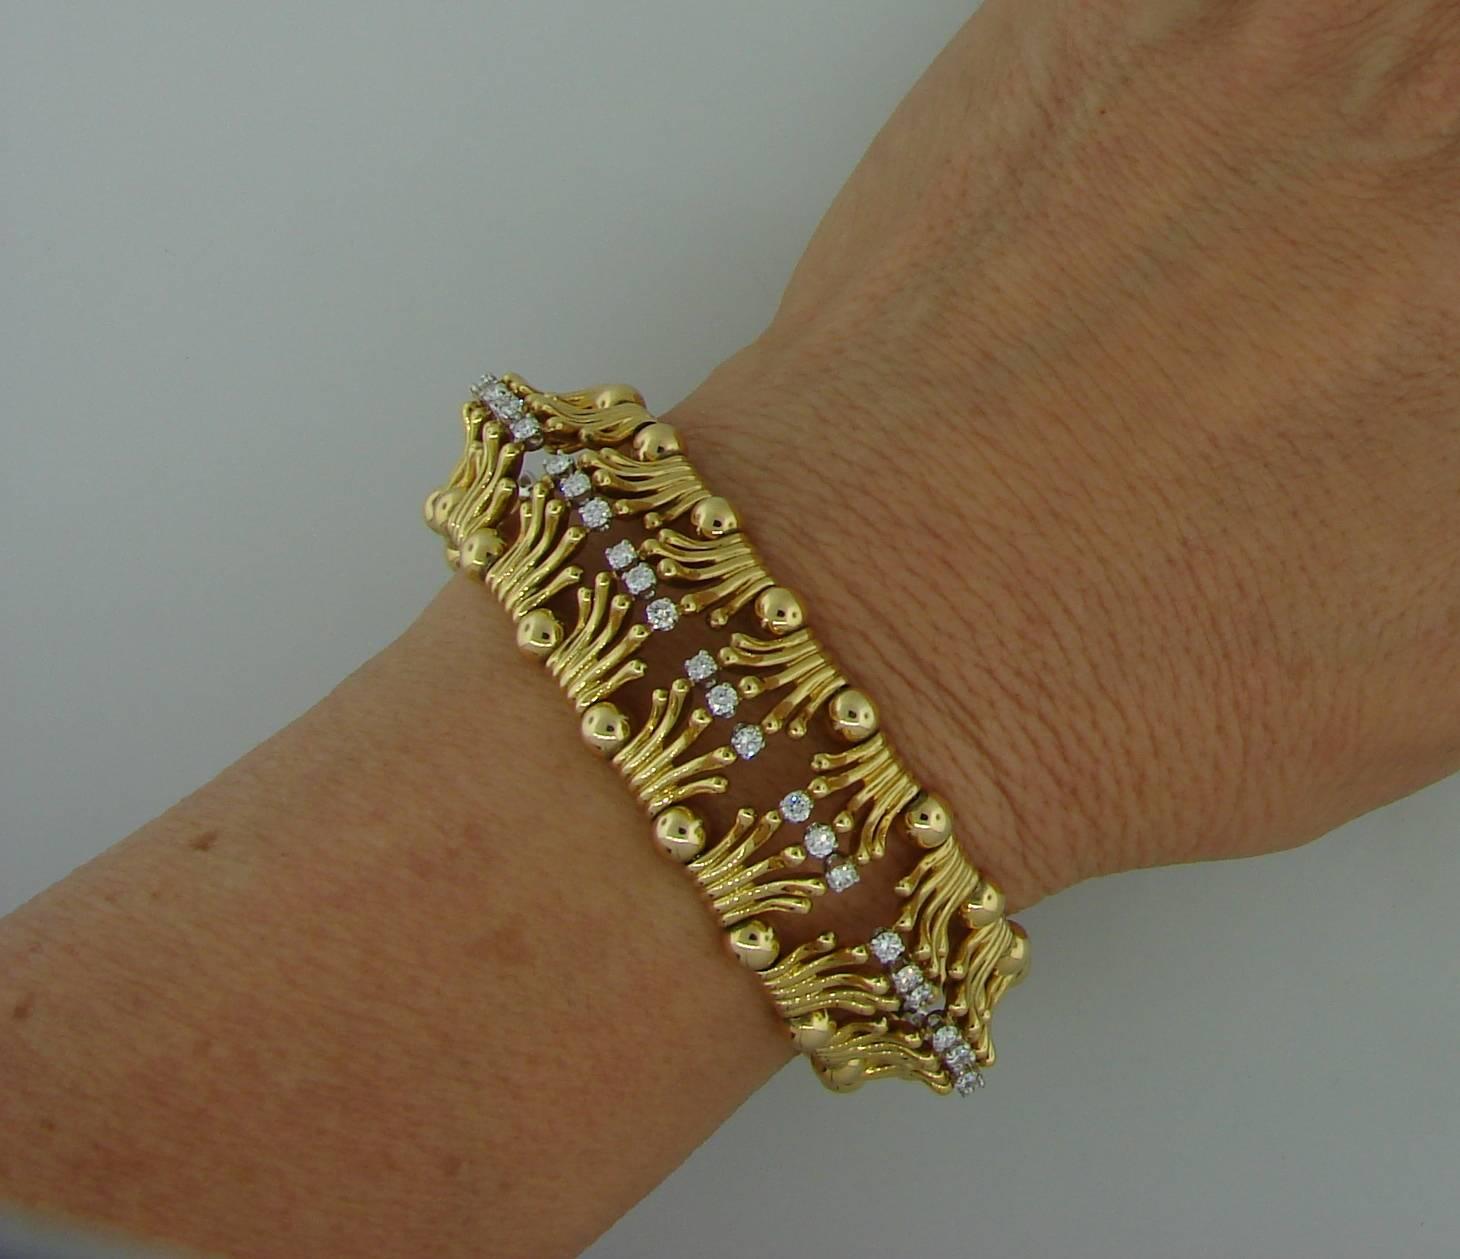 Elegant and timeless bracelet created by Jean Schlumberger for Tiffany & Co. in the 1980s. Beautiful design, perfect proportions, outstanding workmanship! Wearable and chic!
The bracelet is made of 18 karat yellow gold and encrusted with fifty